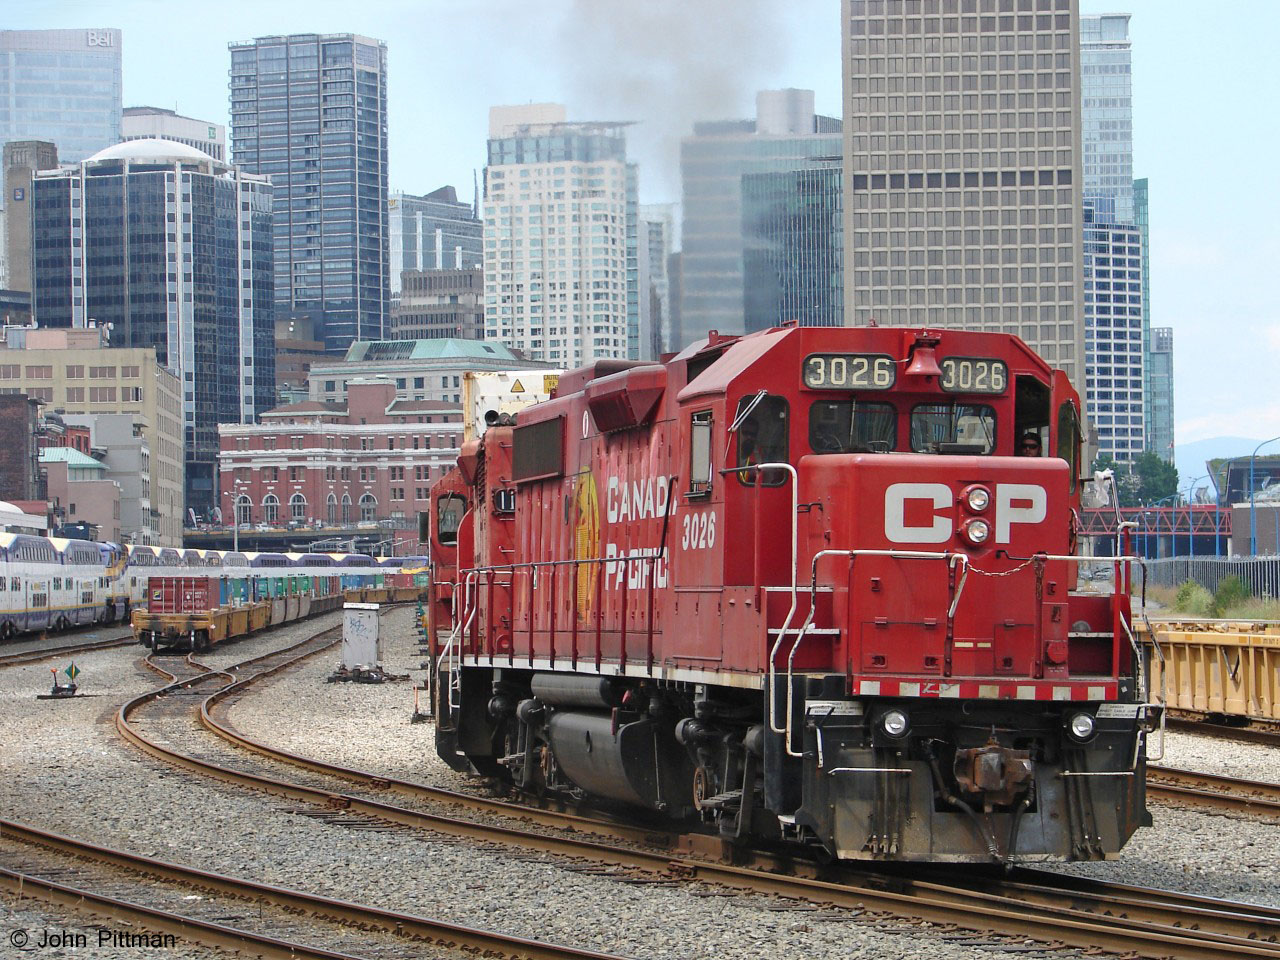 GP38-2 CP 3026 drags control cab CP 1126 (ex-GP35) and a long string of well cars east out of a siding in the CP station yard in downtown Vancouver. Track ends within a mile west, under the Waterfront Centre.  
The red brick building is the West Coast Express Waterfront commuter station, formerly CP Vancouver station. W.C.E. trains can be seen tied up on the left side, awaiting their evening commuter runs.